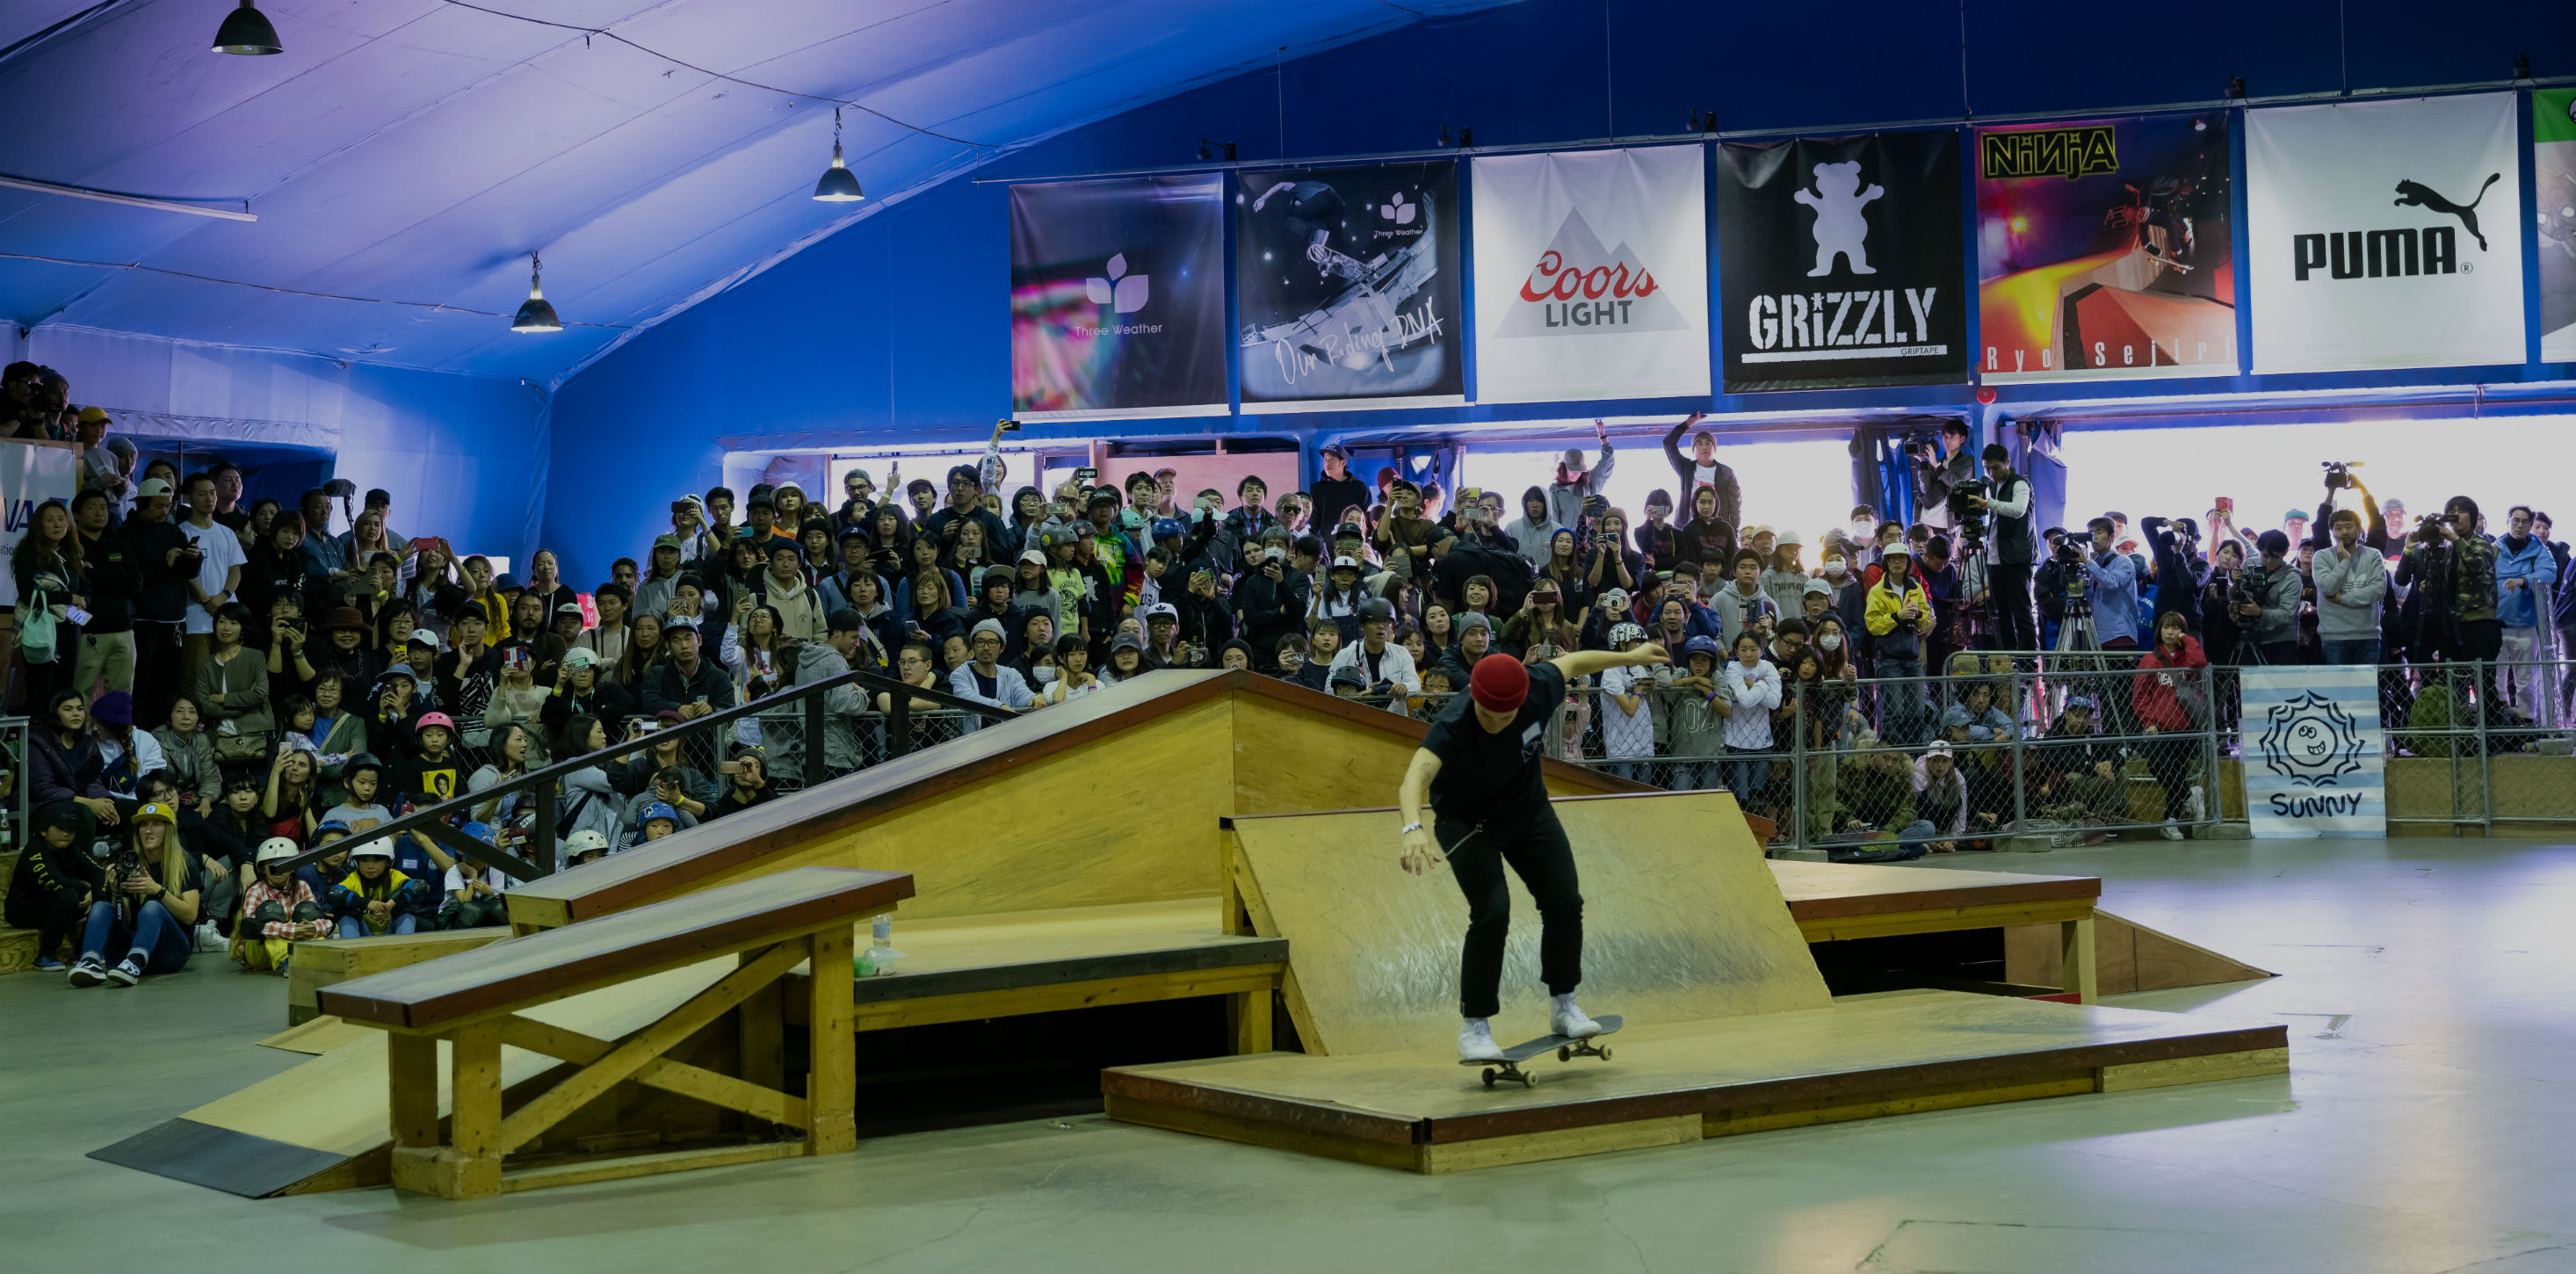 We hosted the largest women’s skateboarding event ever held in Asia